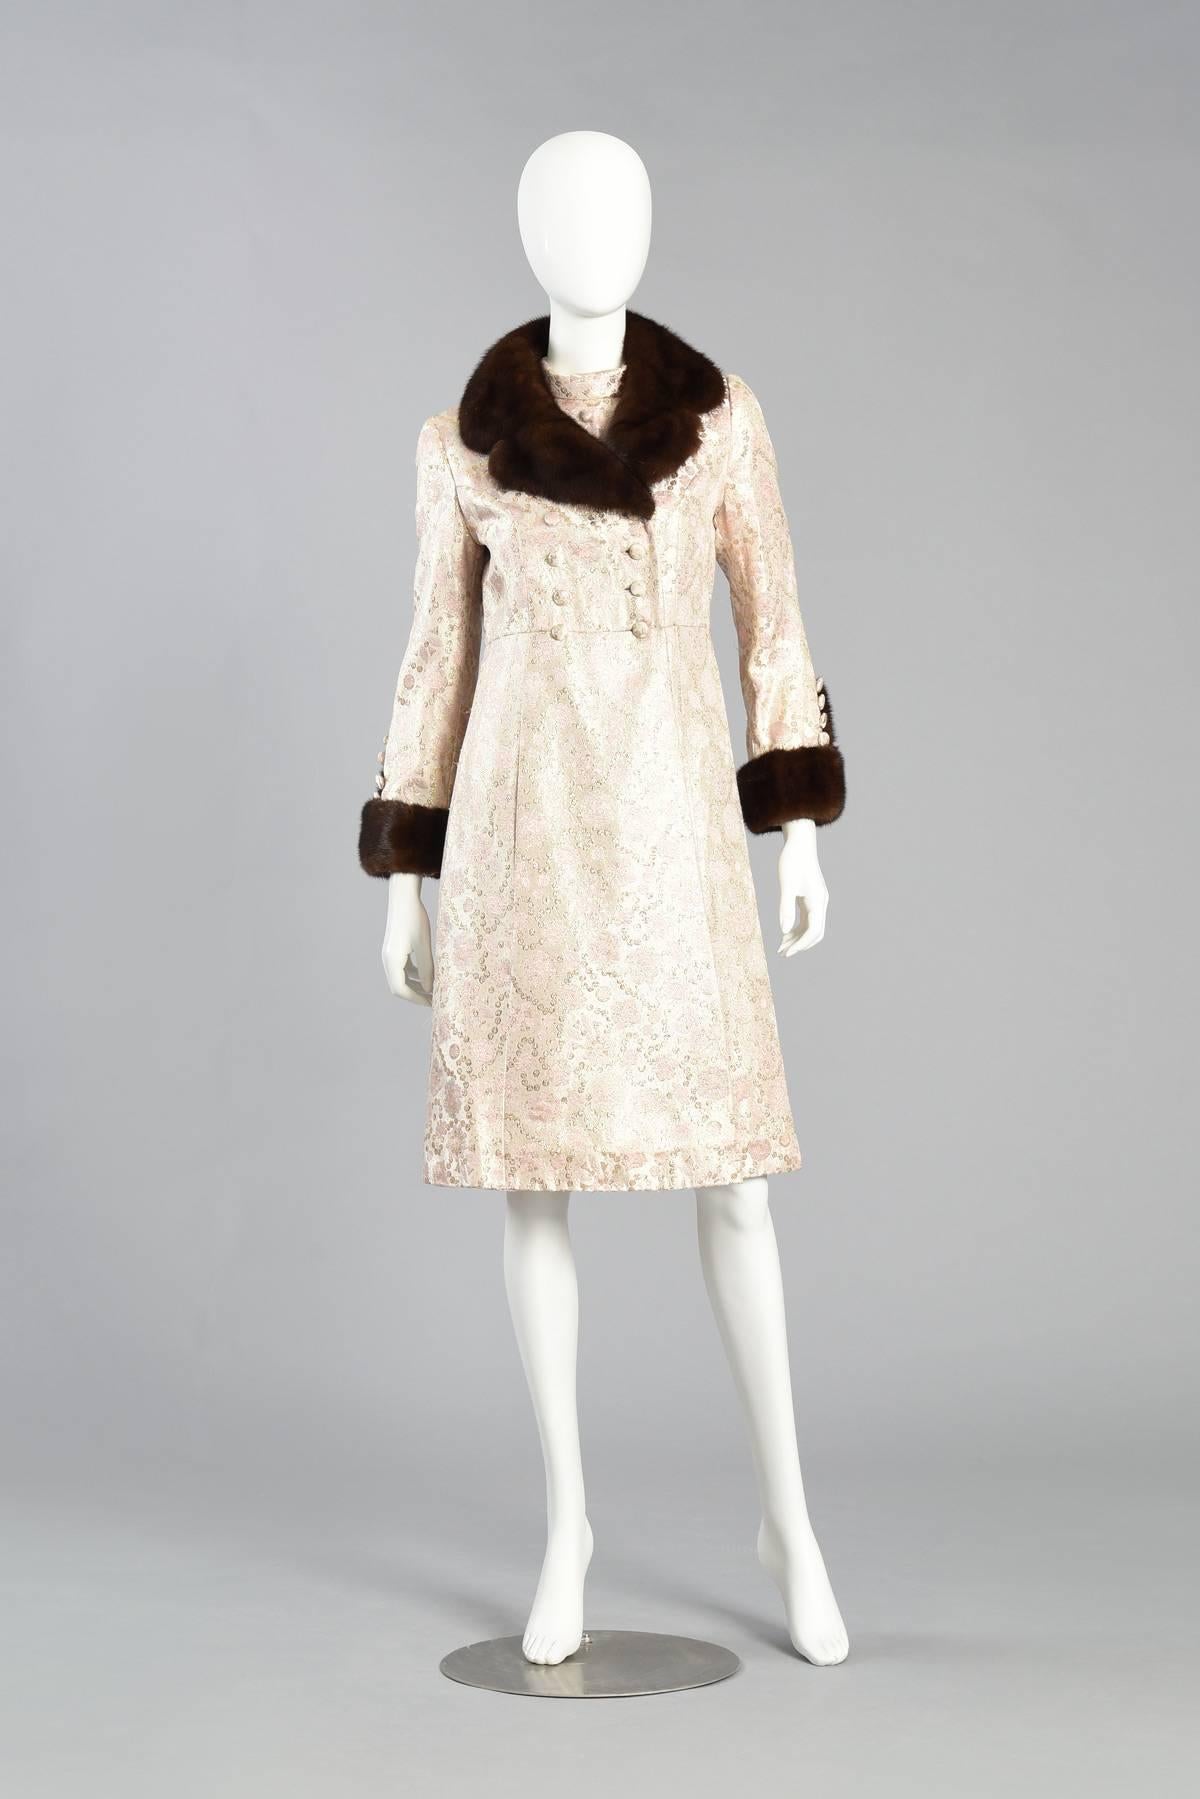 Darling 1960s pale pink brocade dress and jacket ensemble. Such an incredible color palette! The dress features a fitted bodice with mock neck, covered buttons and pleated, flared, a-line skirt. The matching coat features a double breasted, fitted